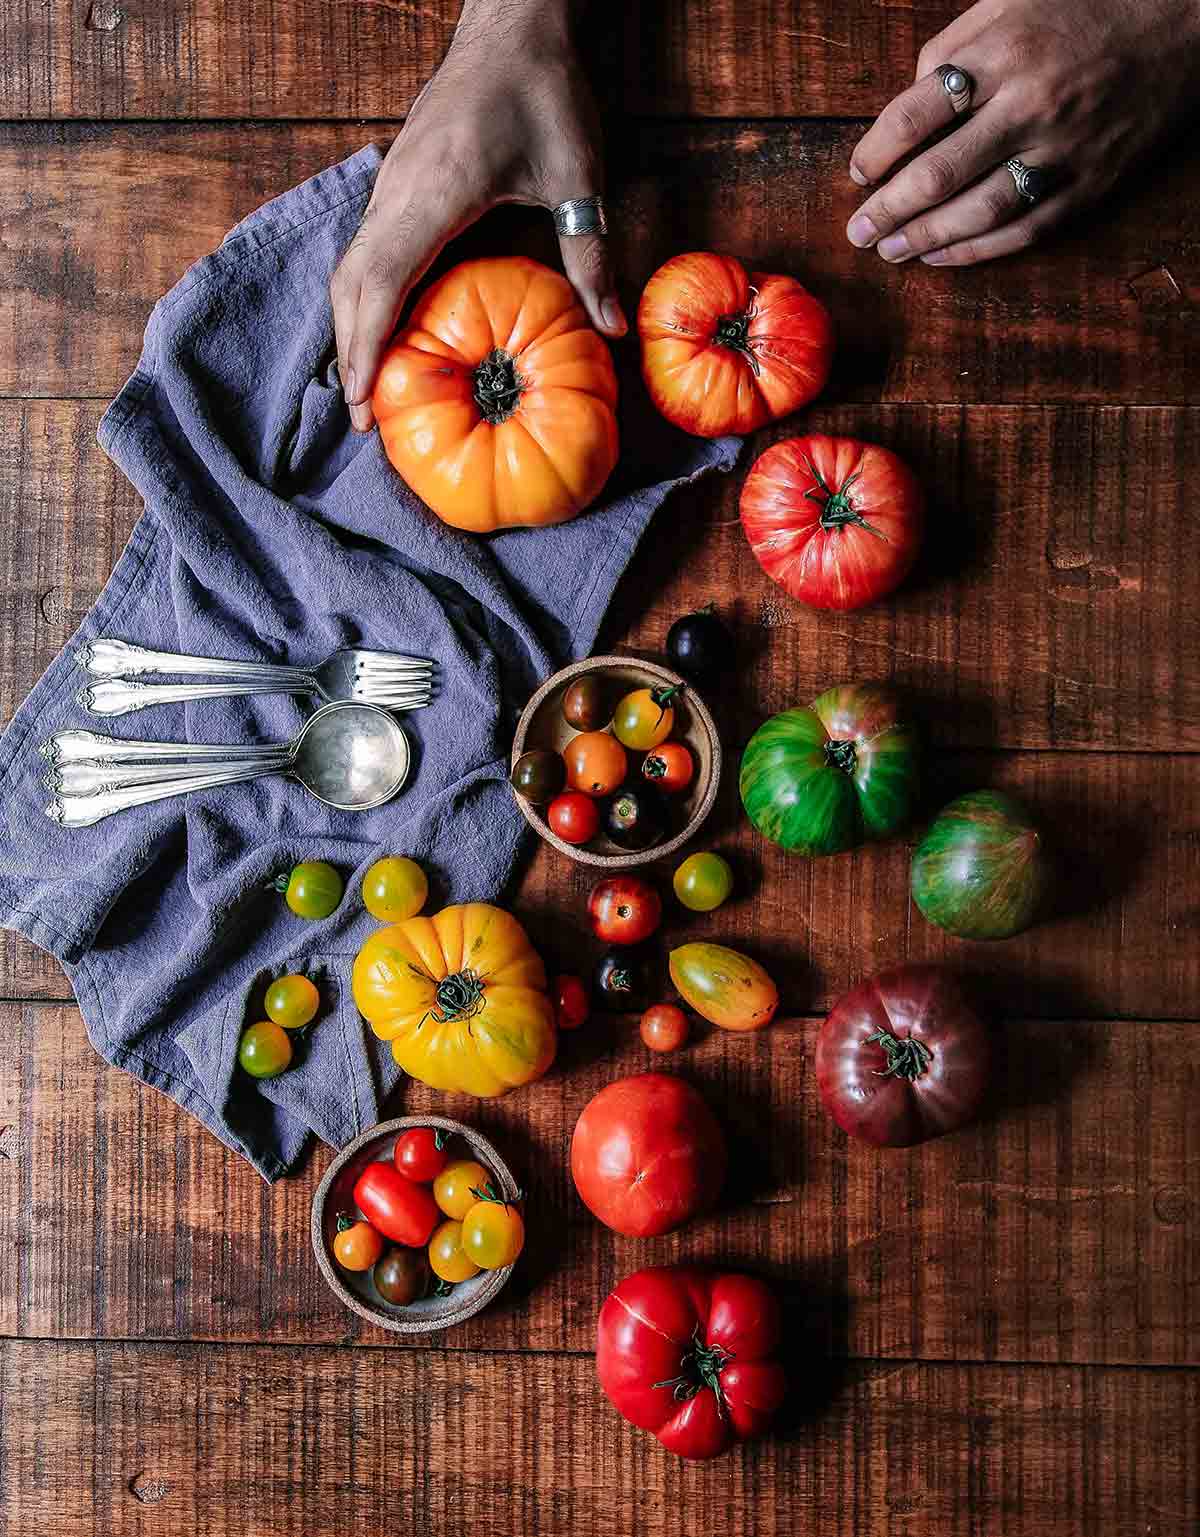 A wooden table filled with assorted tomatoes, a cloth napkin, spoons, and forks, and a person gently squeezing a tomato to check if it is perfectly ripe.